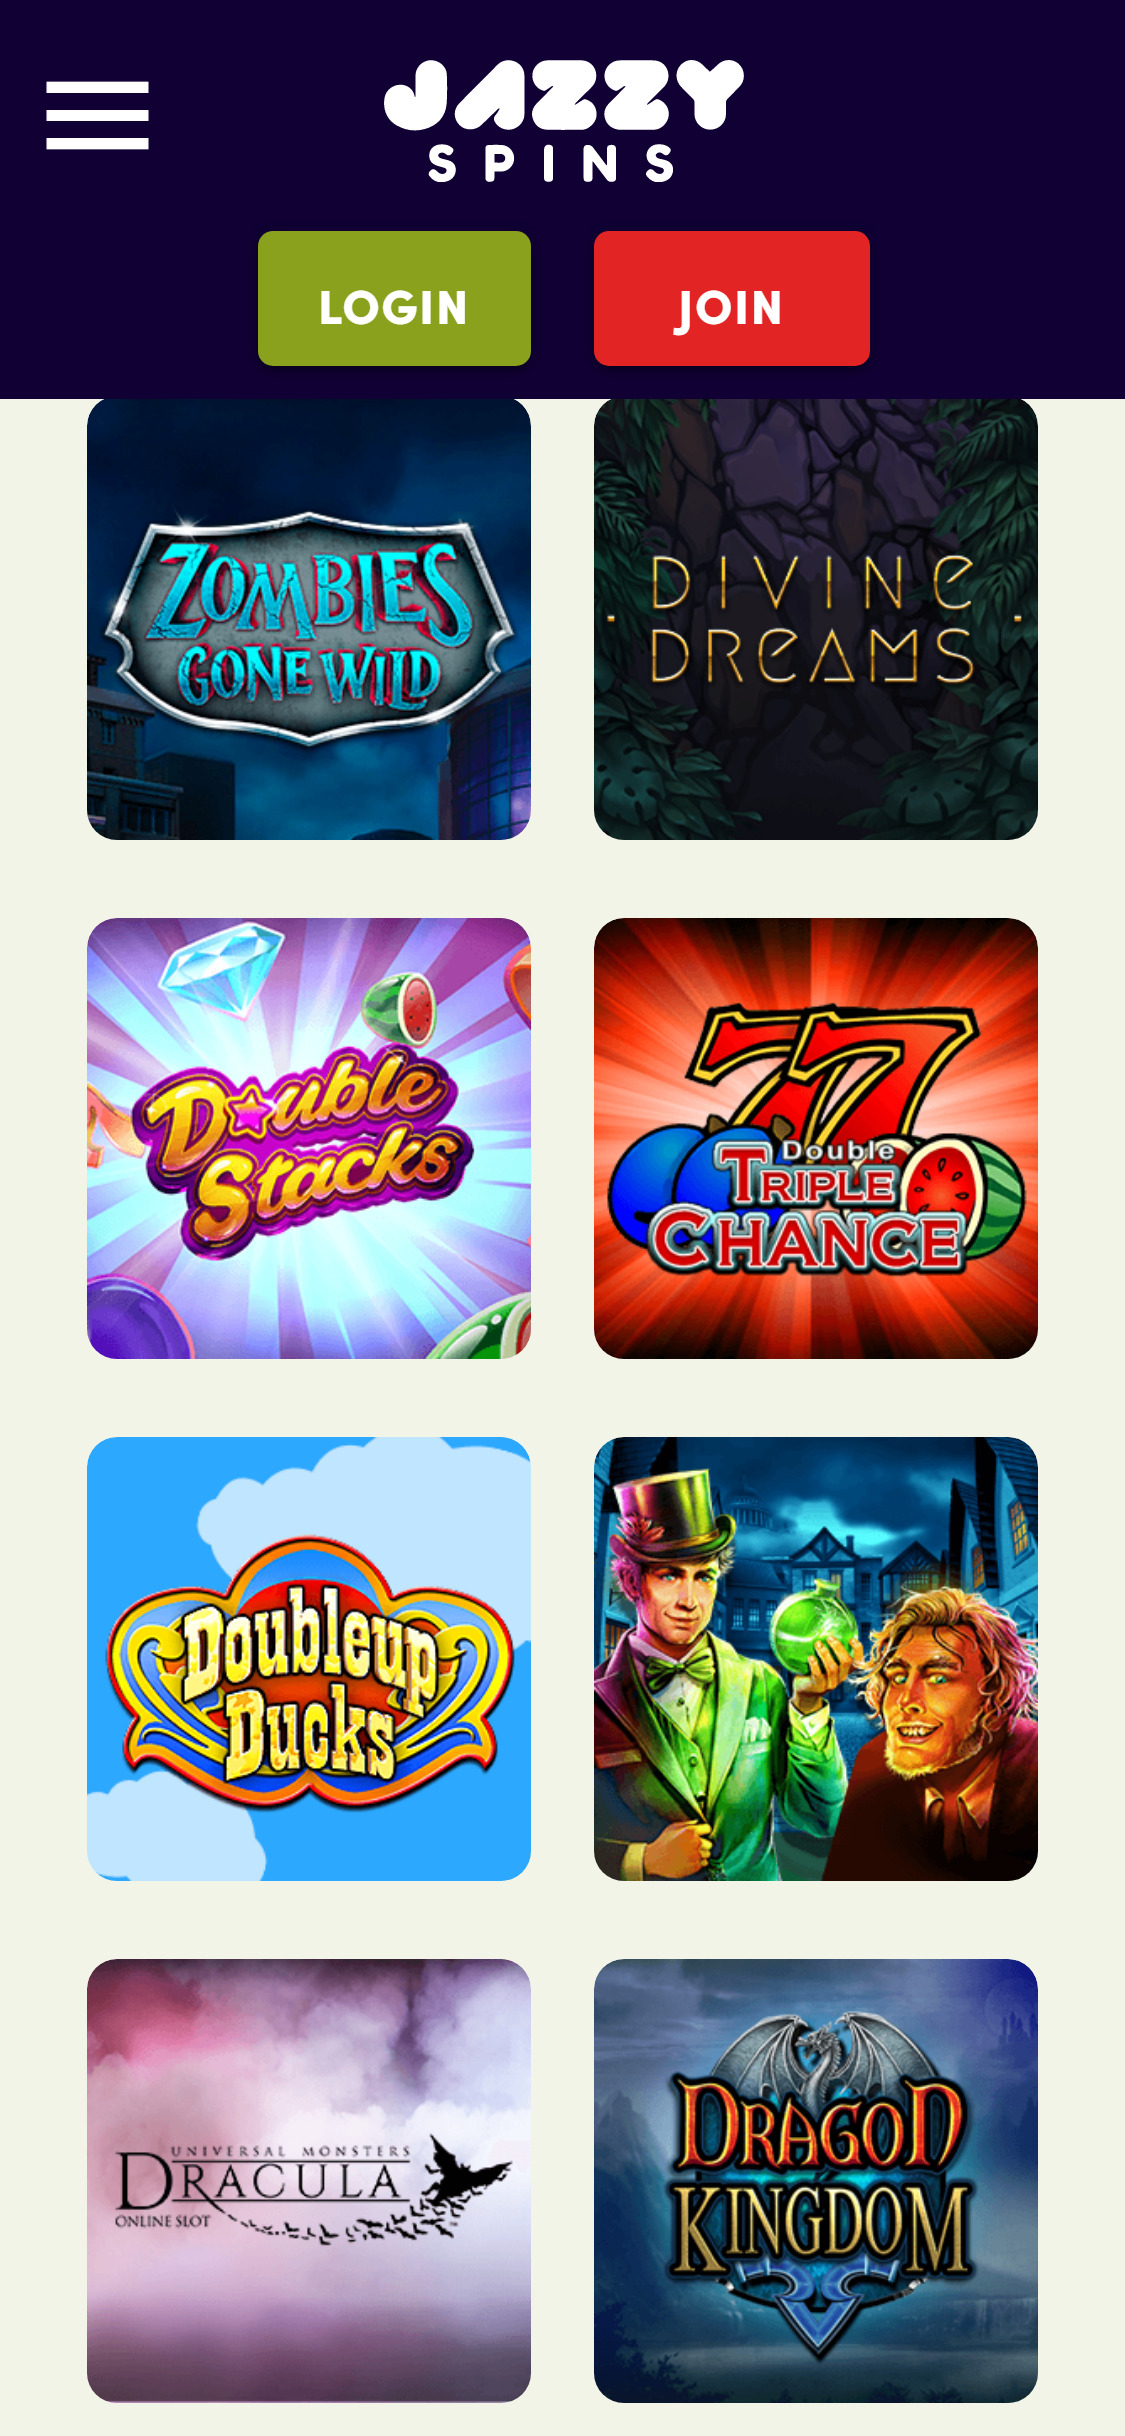 Jazzy Spins Casino Mobile Games Review